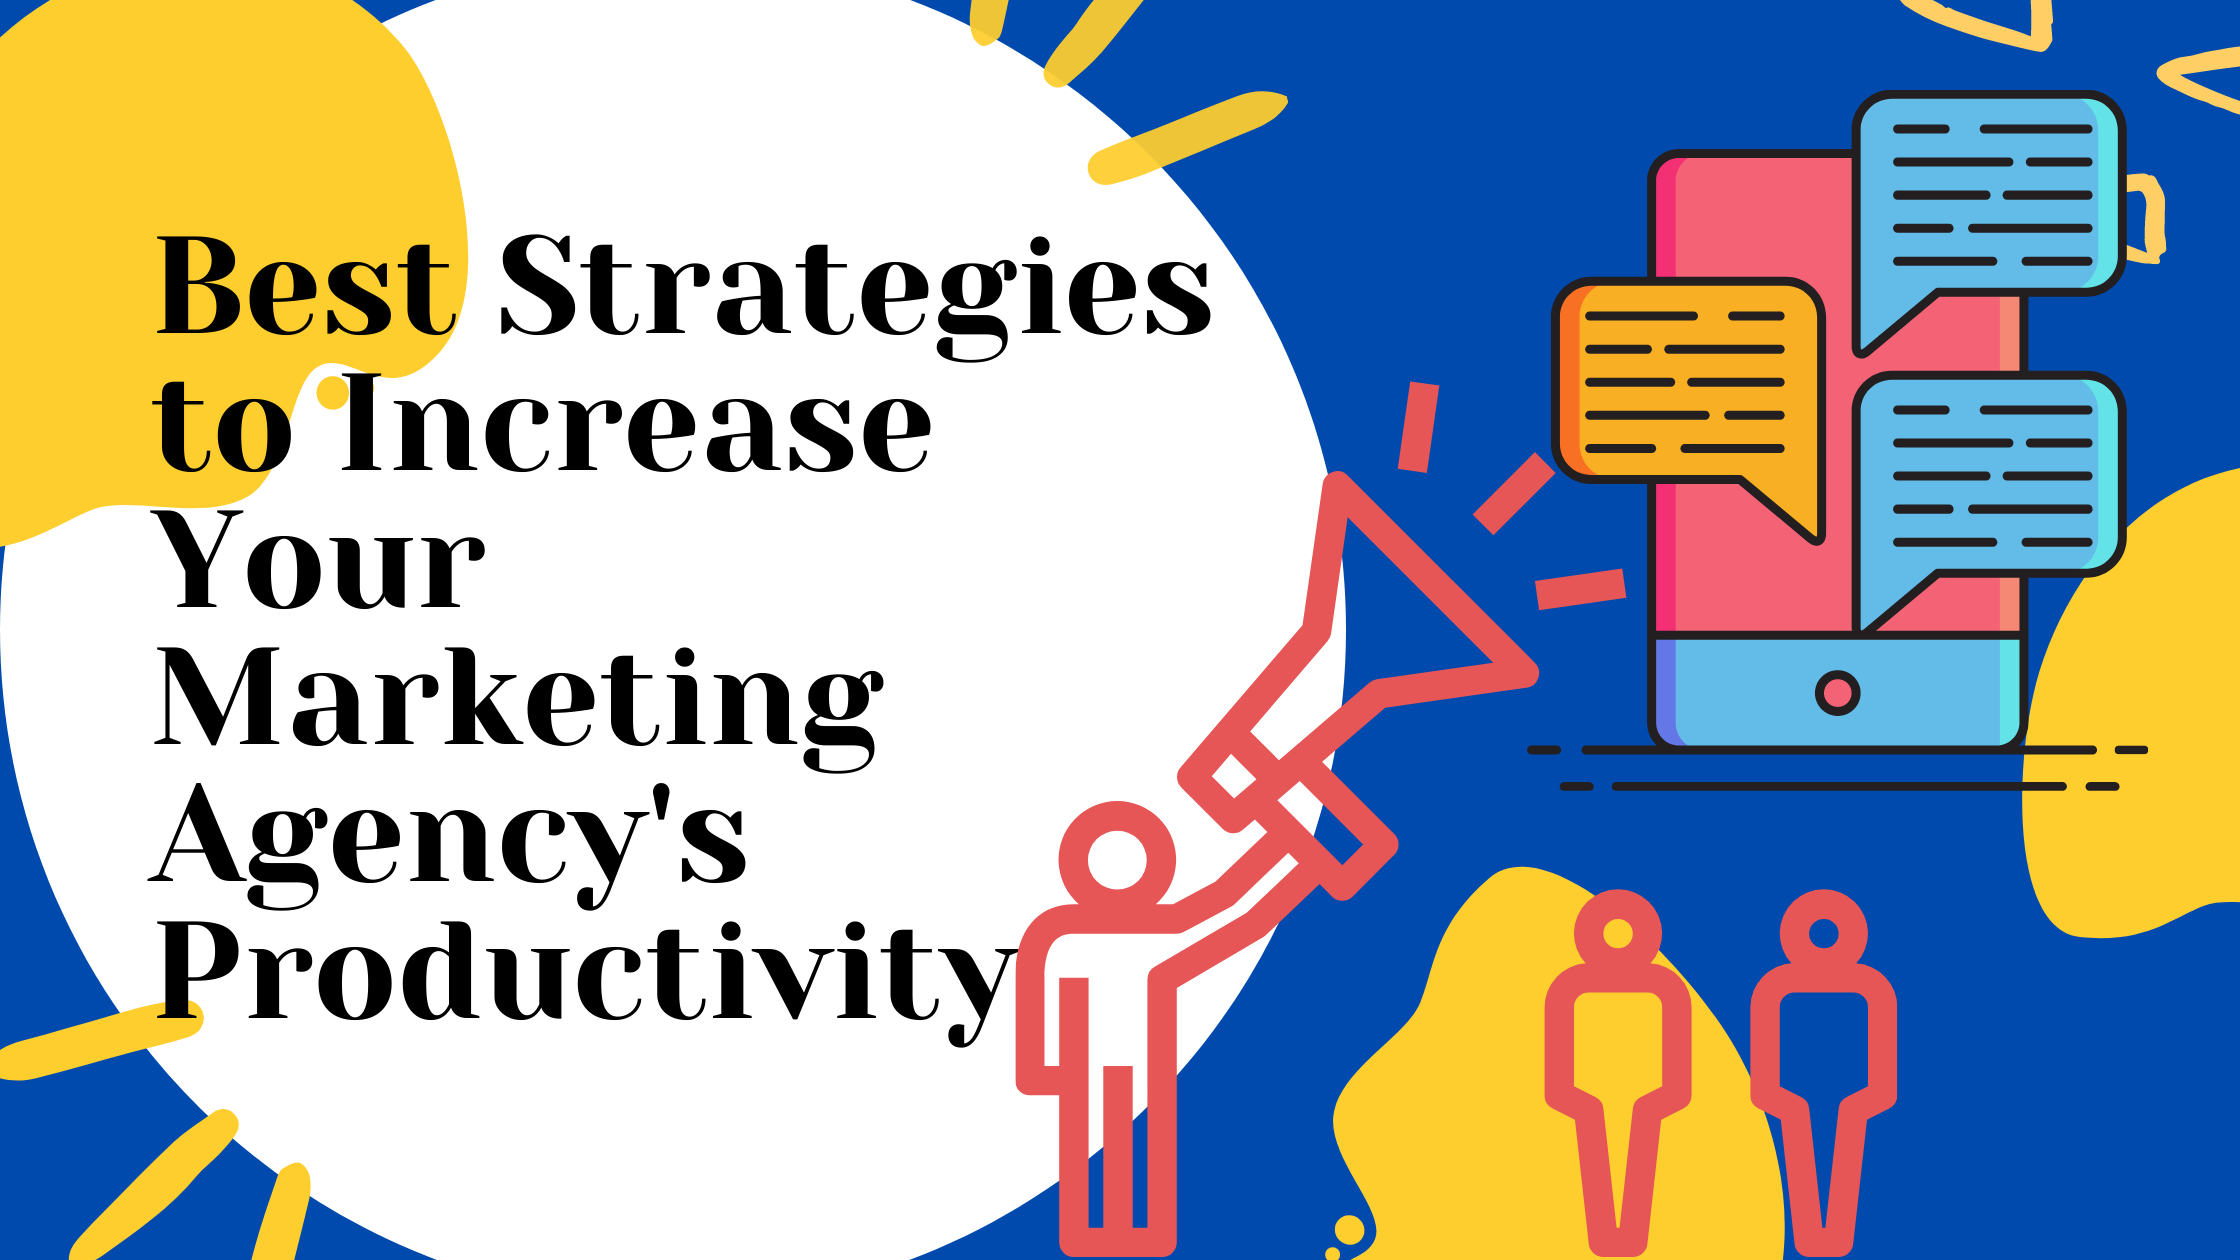 Best Strategies to Improve Your Marketing Agency’s Productivity